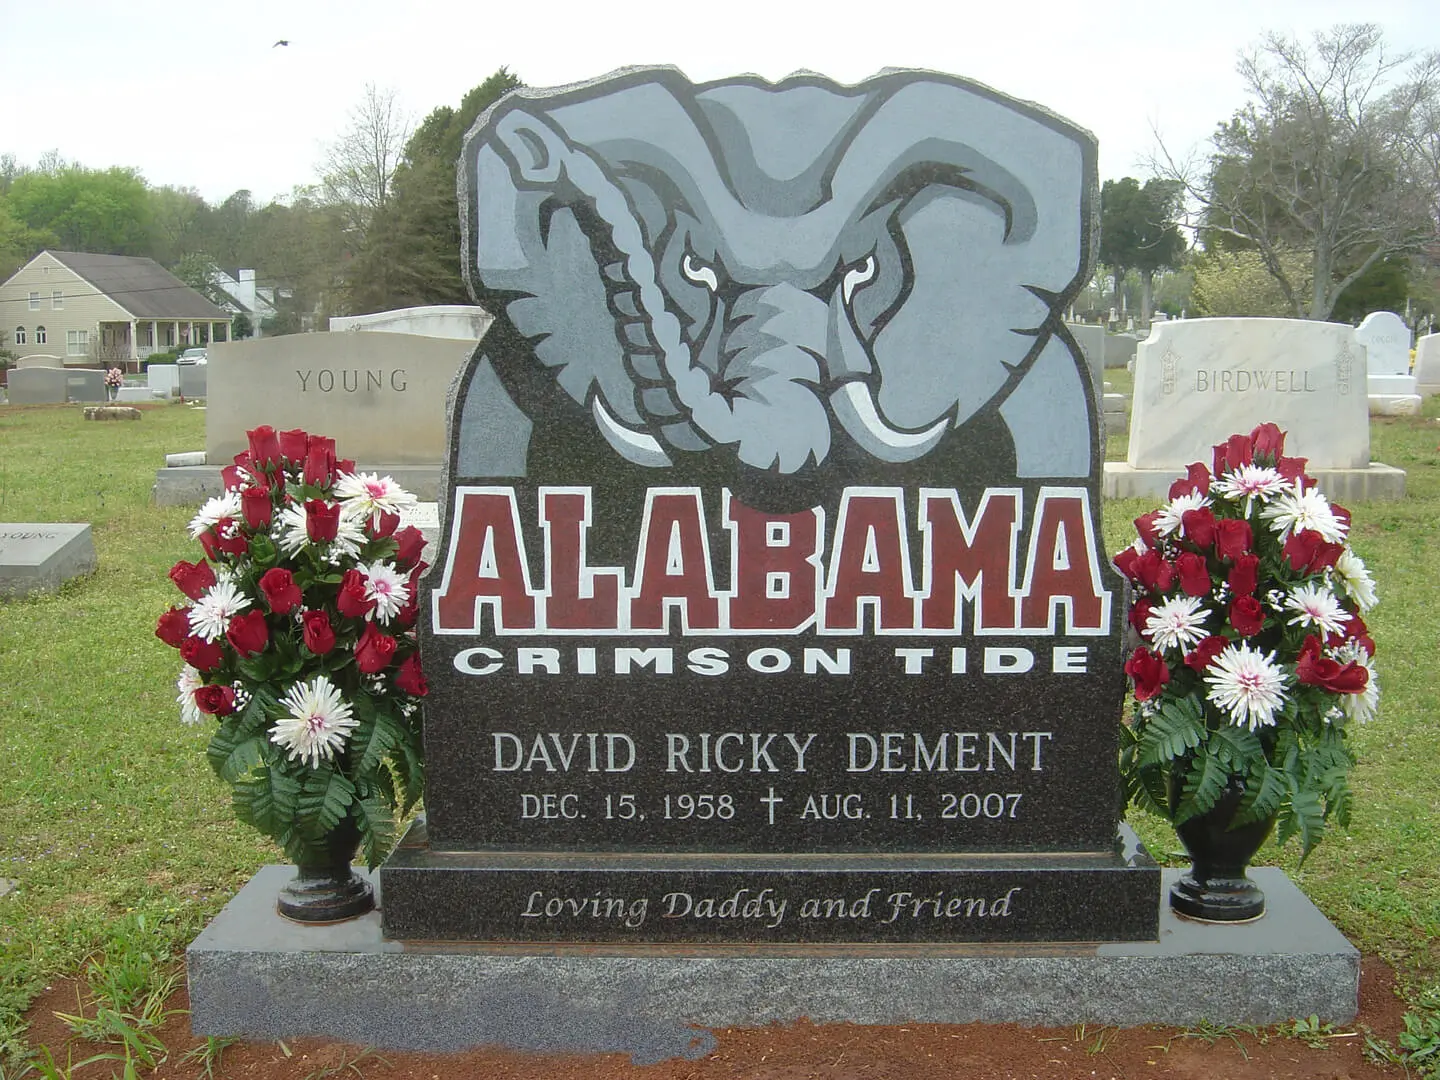 A memorial slab with the name David Ricky Dement